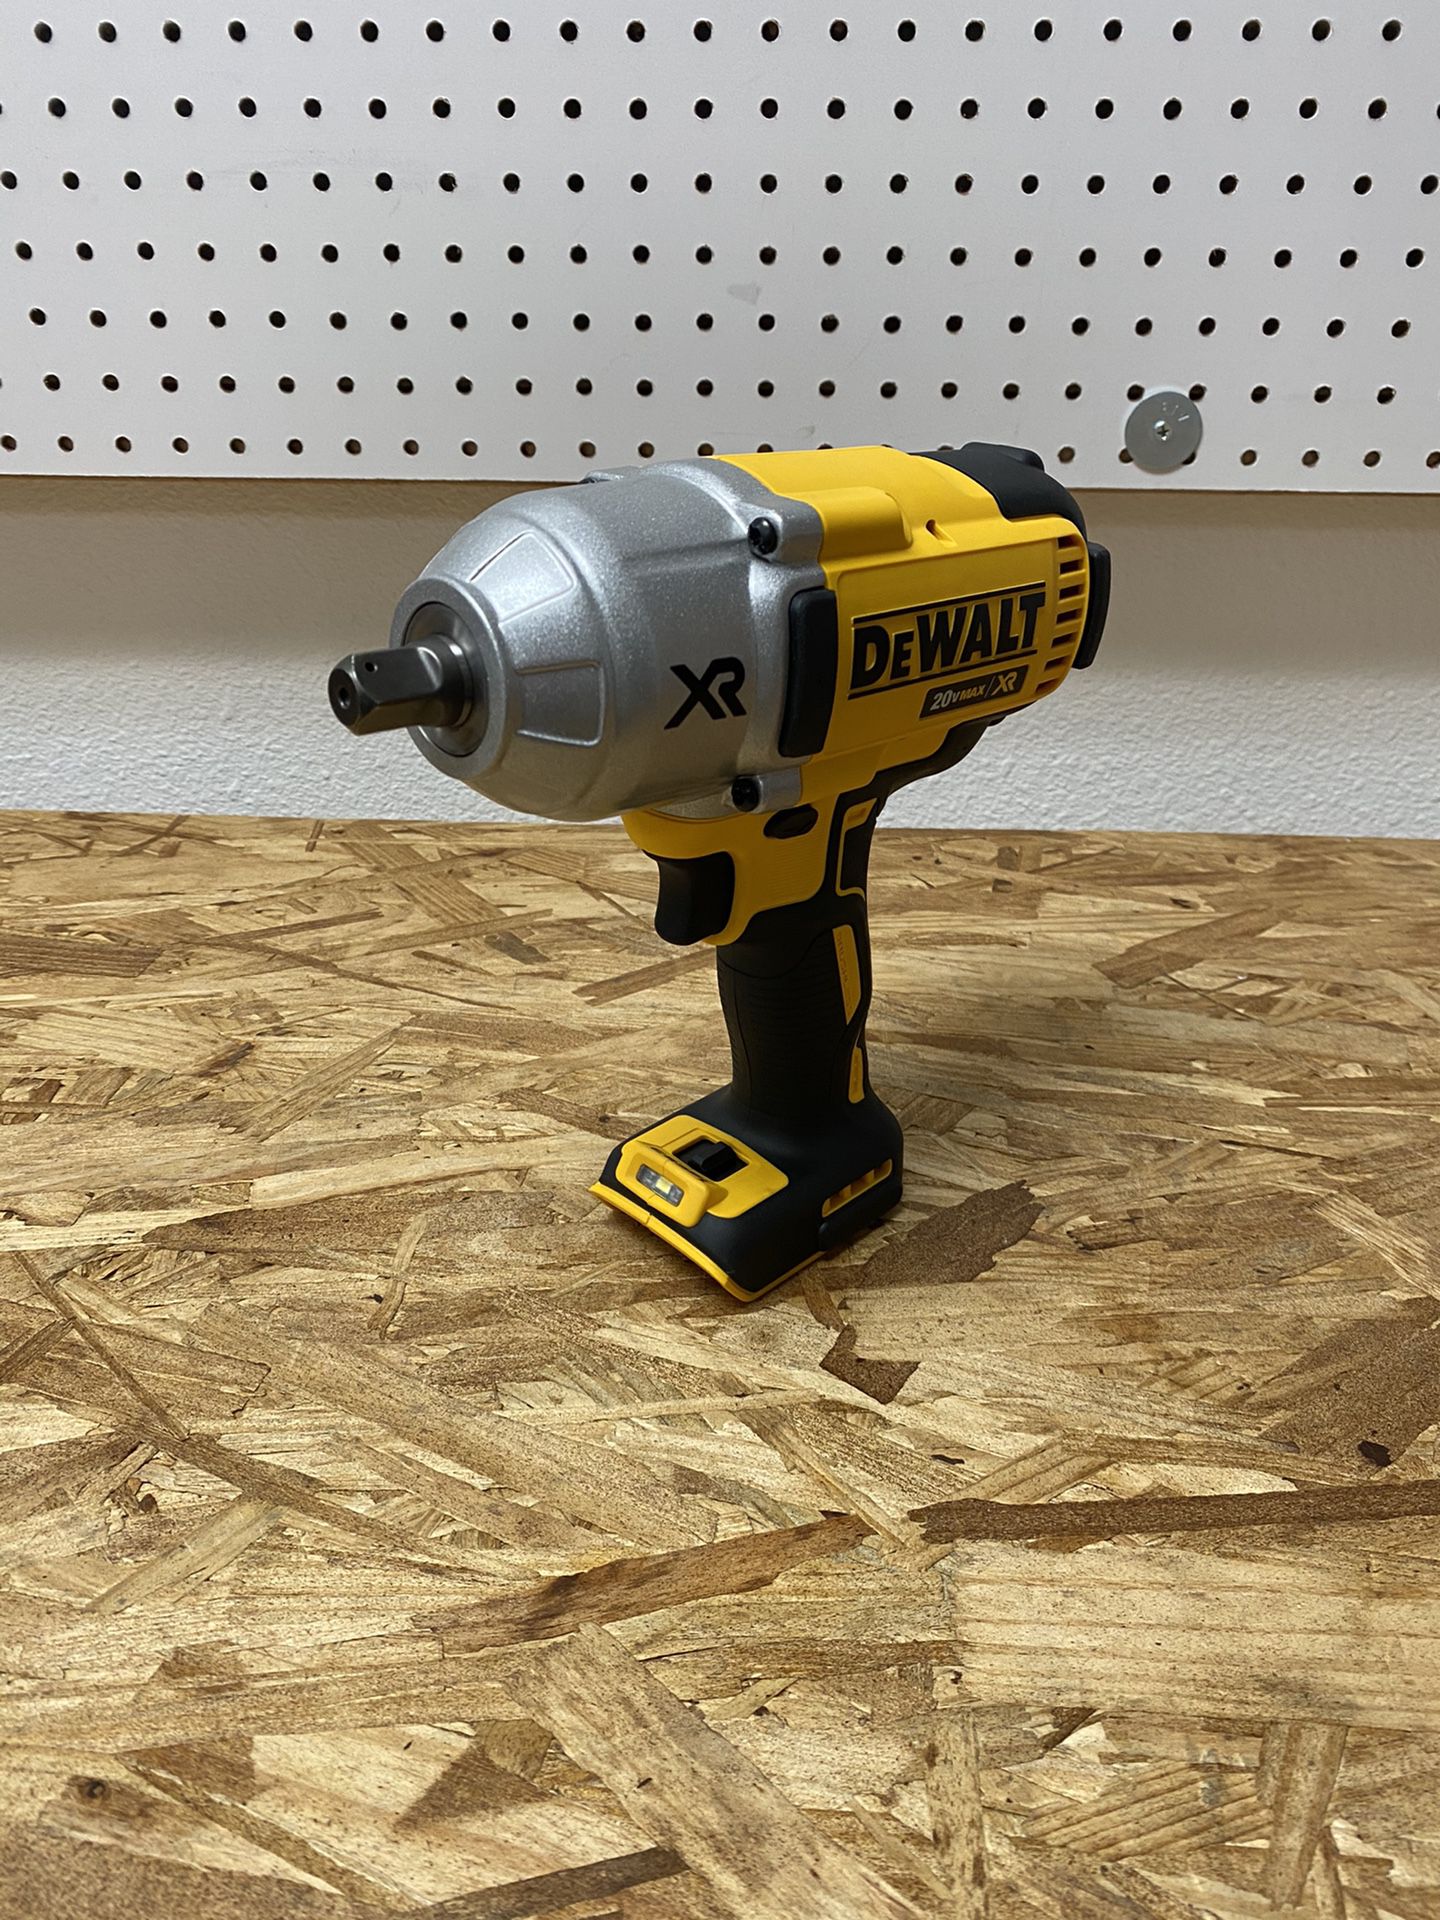 ⚠️ DEWALT 20-Volt MAX XR Cordless Brushless High Torque 1/2 in. Impact Wrench w/ Detent Pin Anvil (Tool Only)⚠️